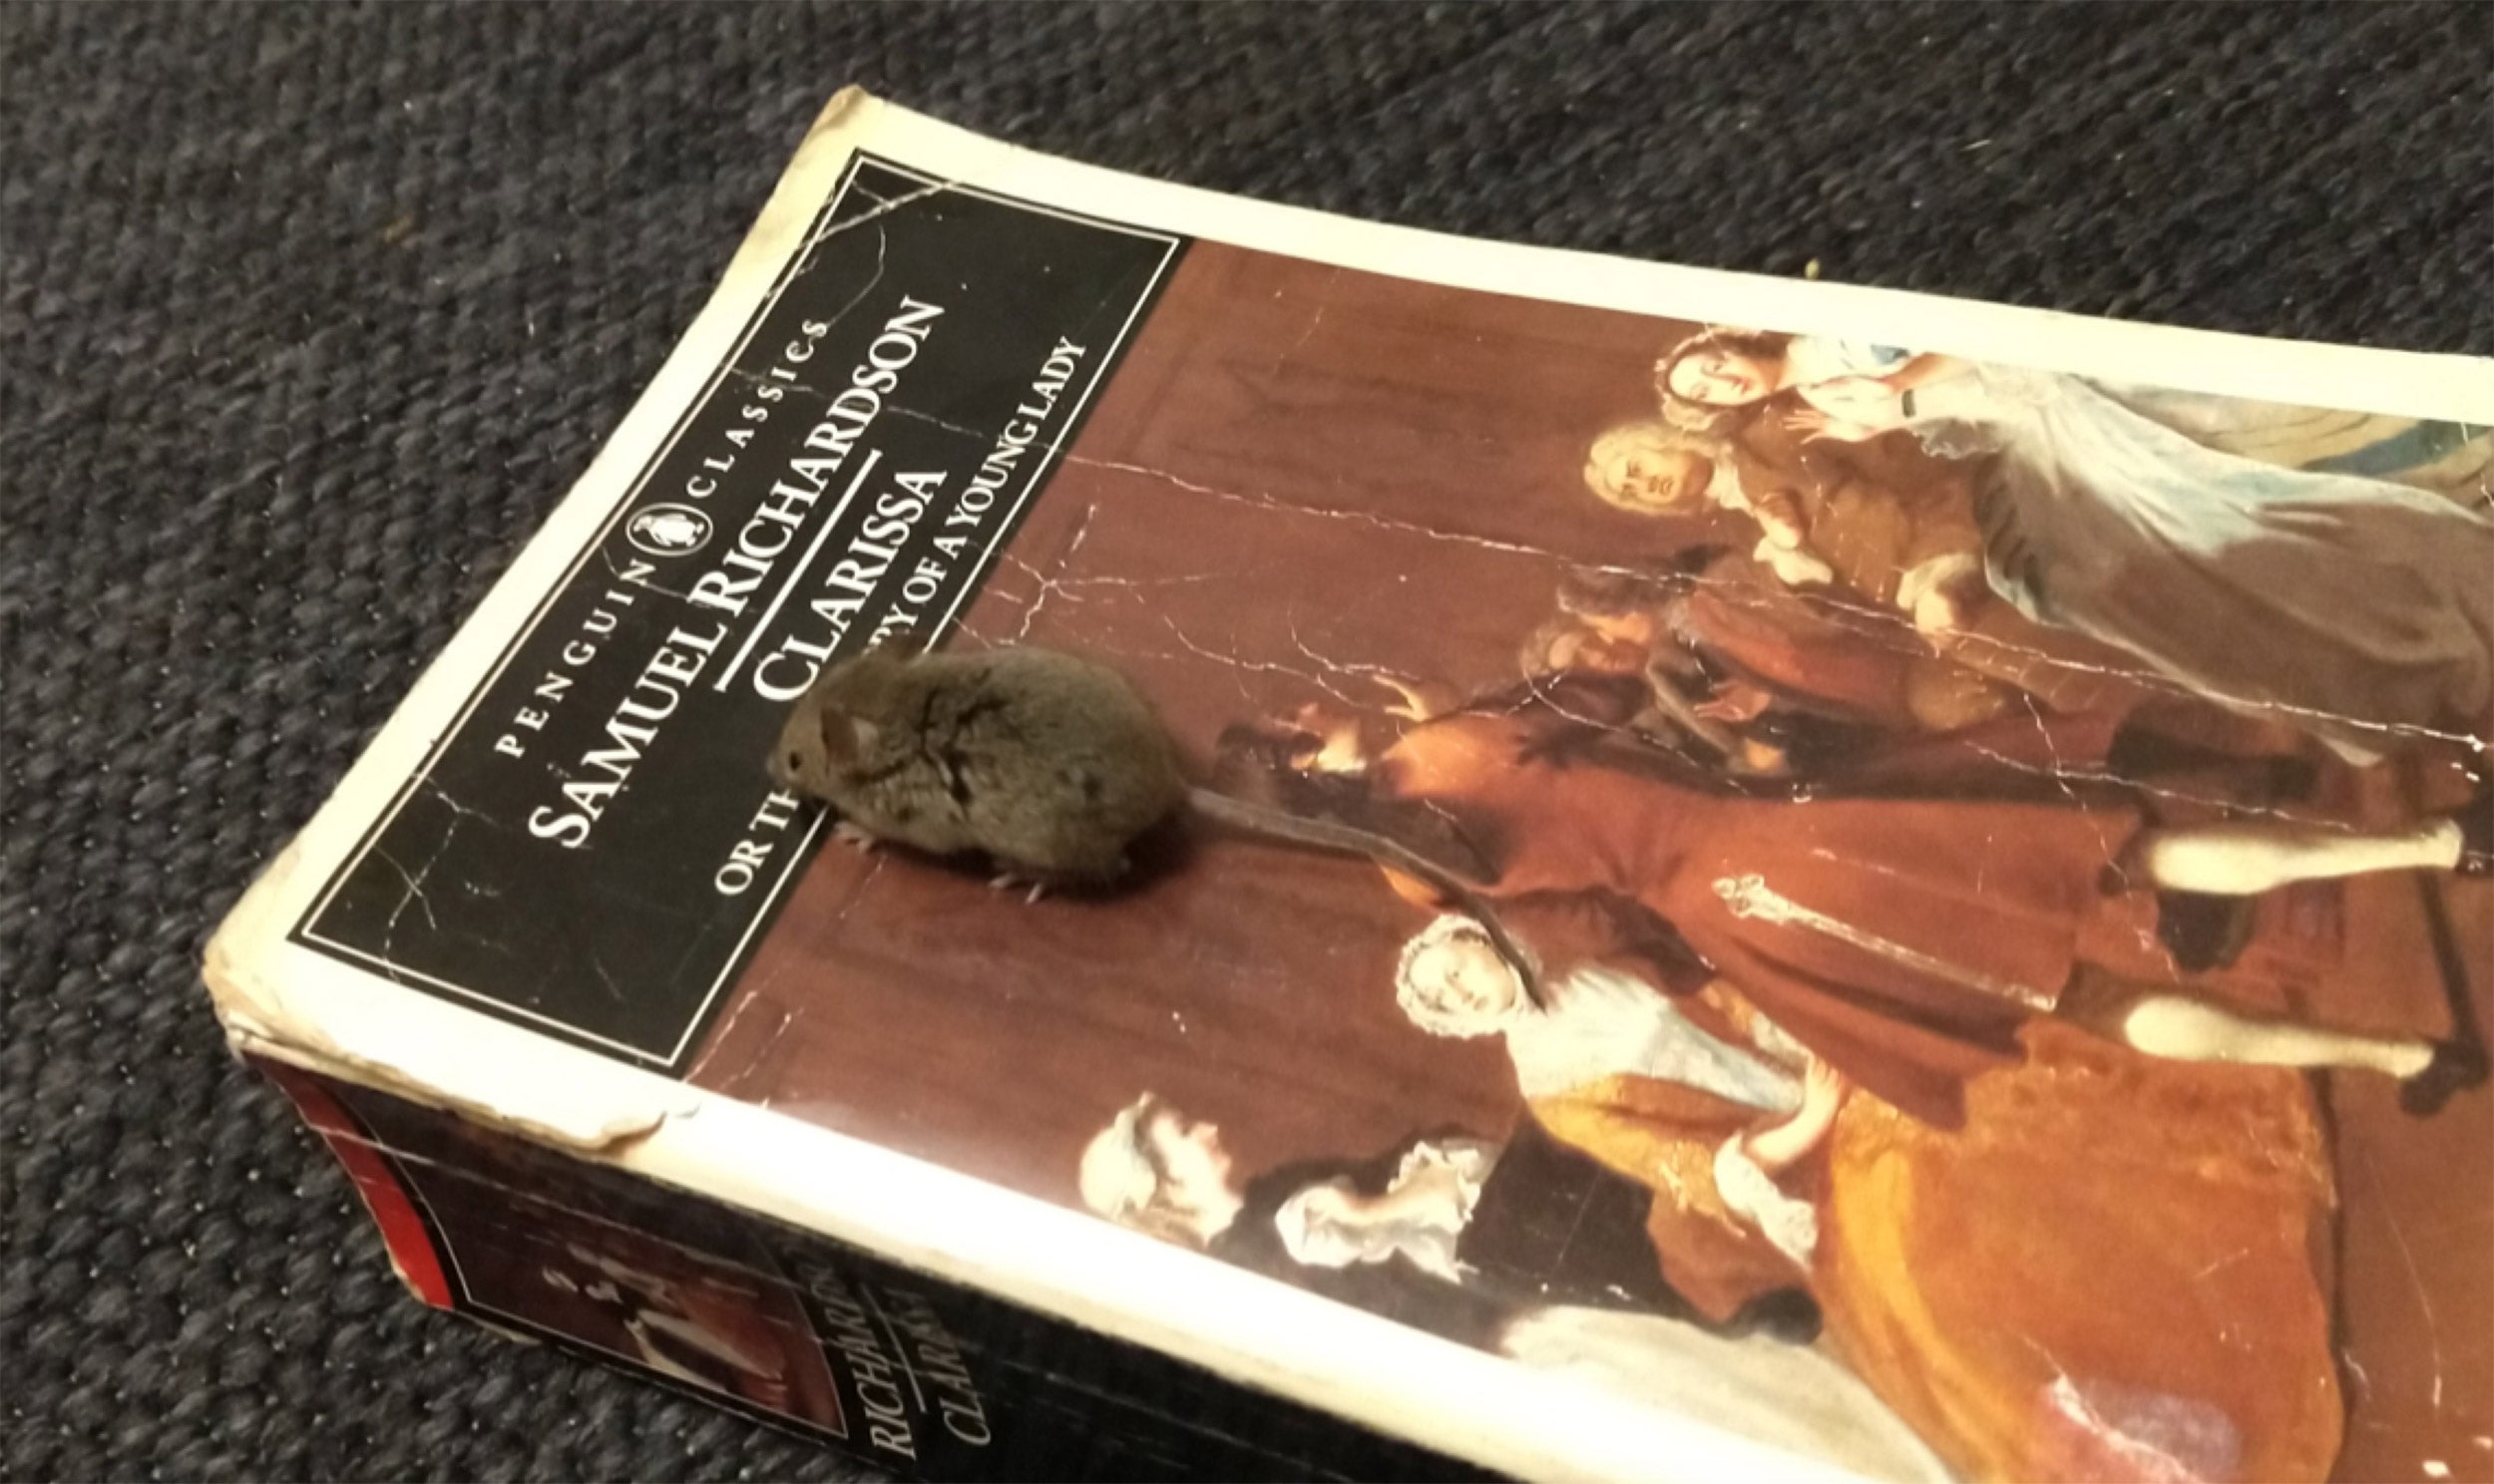 A mouse on a book.